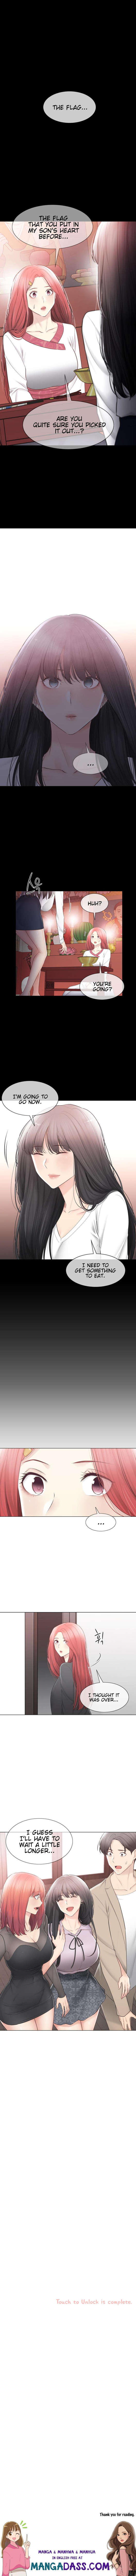 Touch On - Chapter 109.2 Page 8